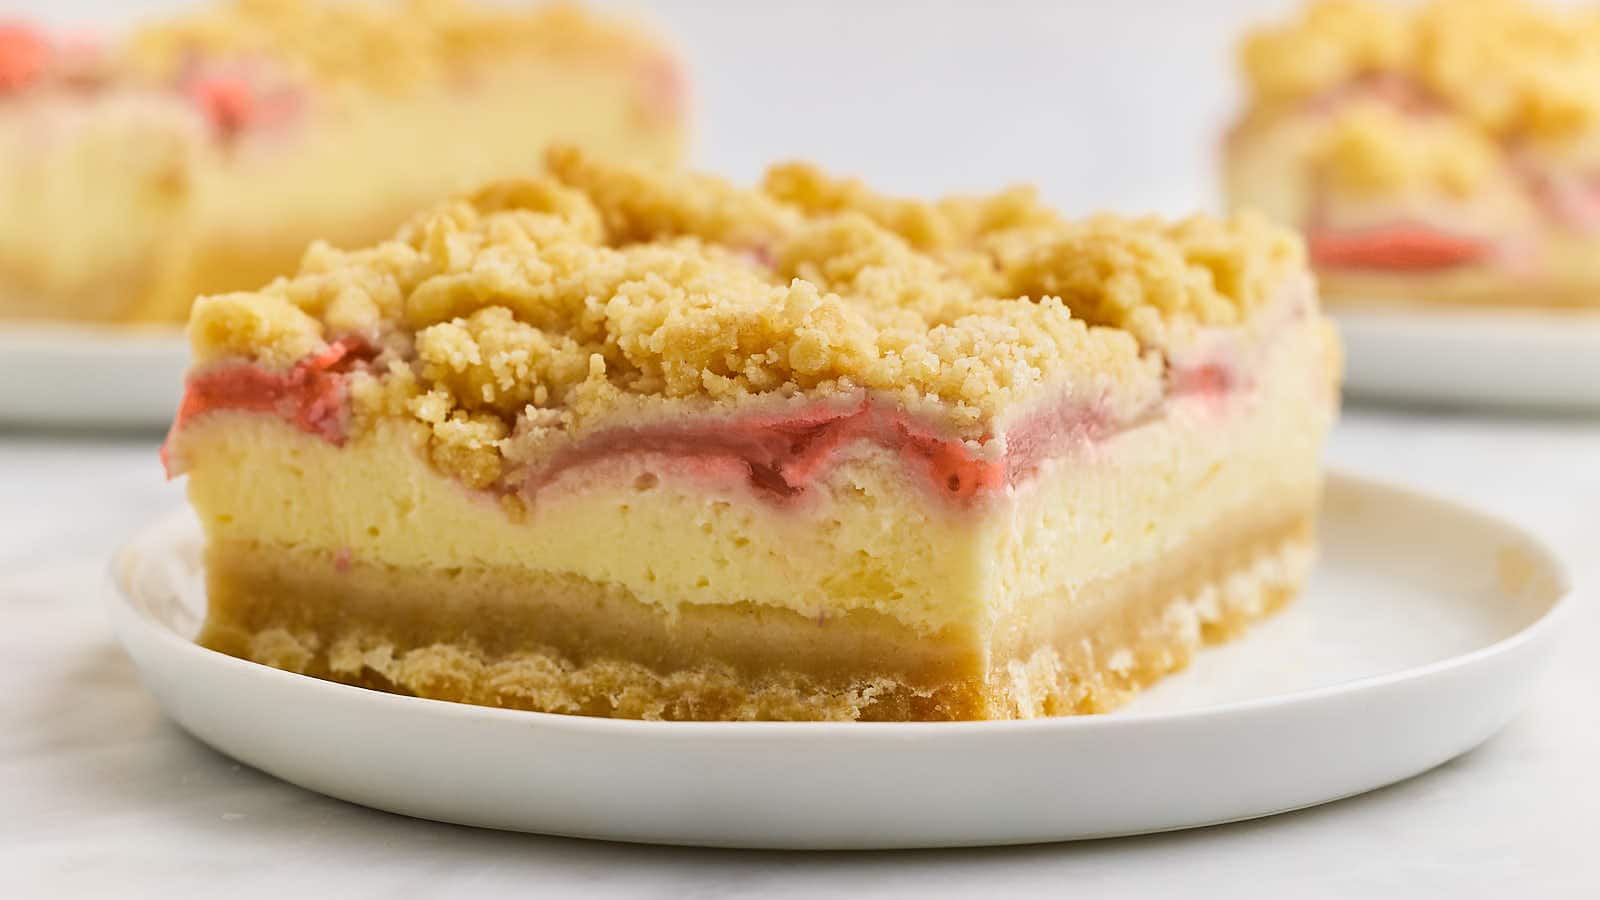 Strawberry Cheesecake Bars recipe by Cheerful Cook.